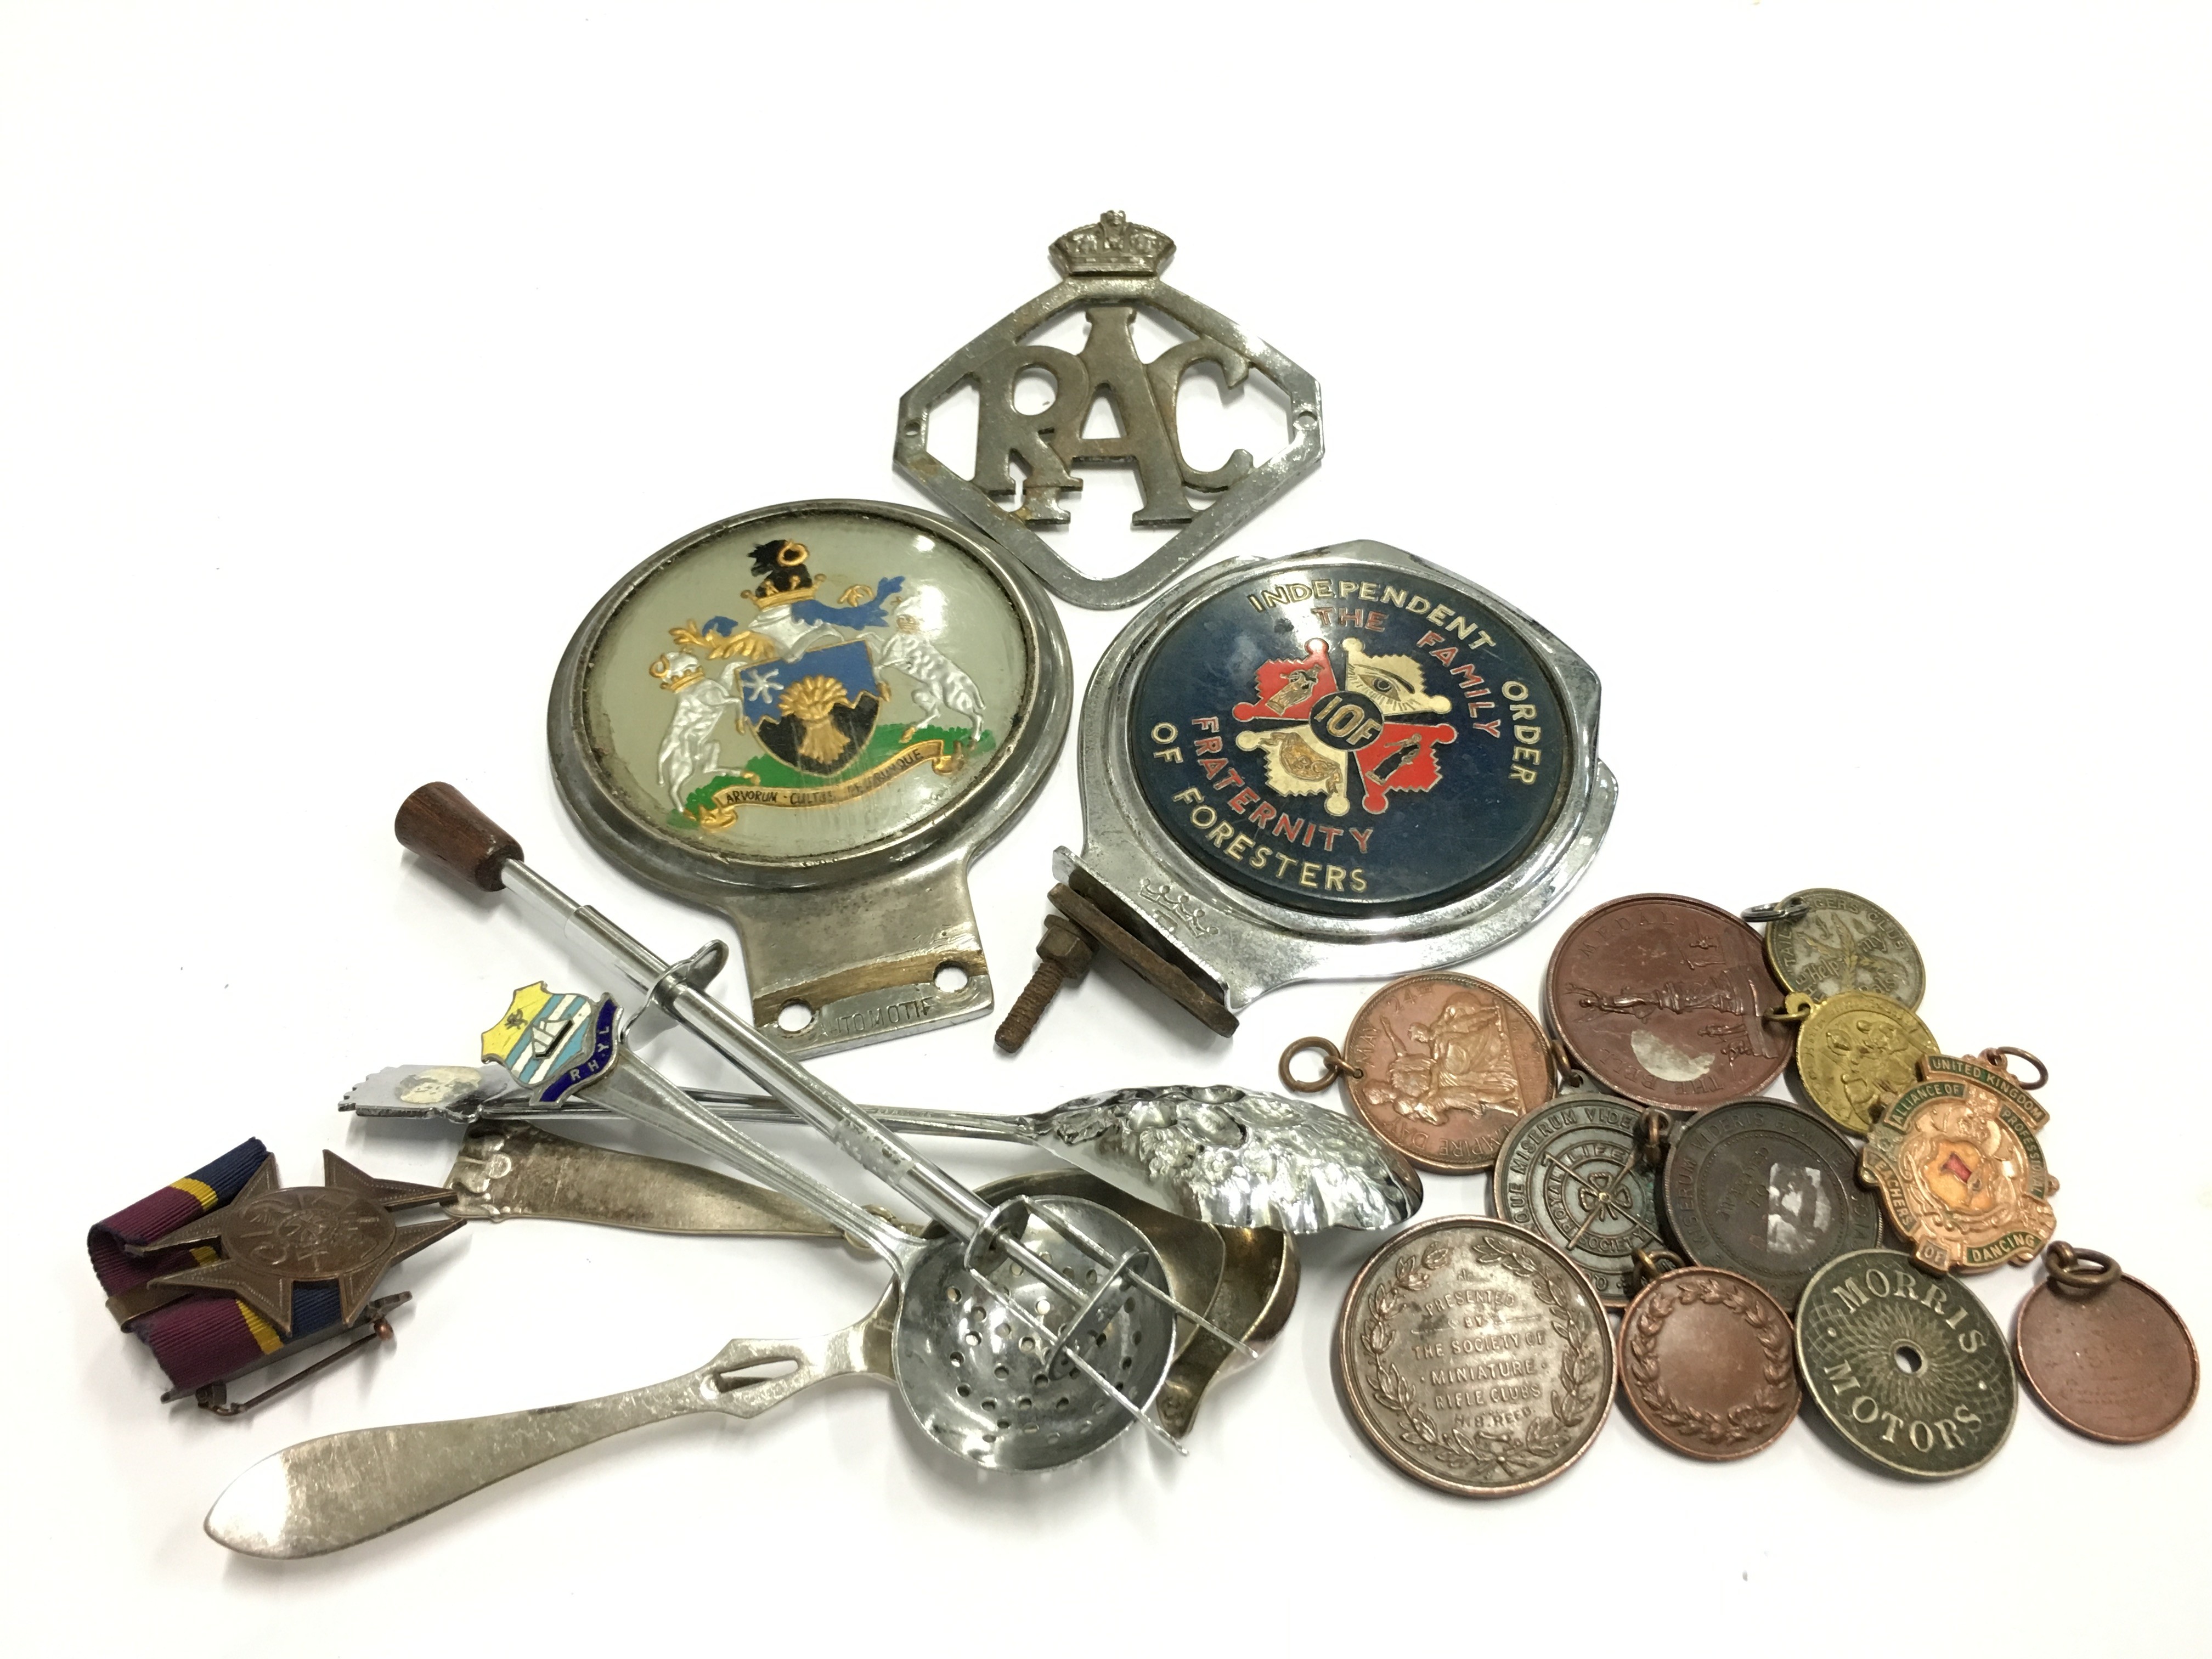 A carton containing three various car badges together with other items including medallions.